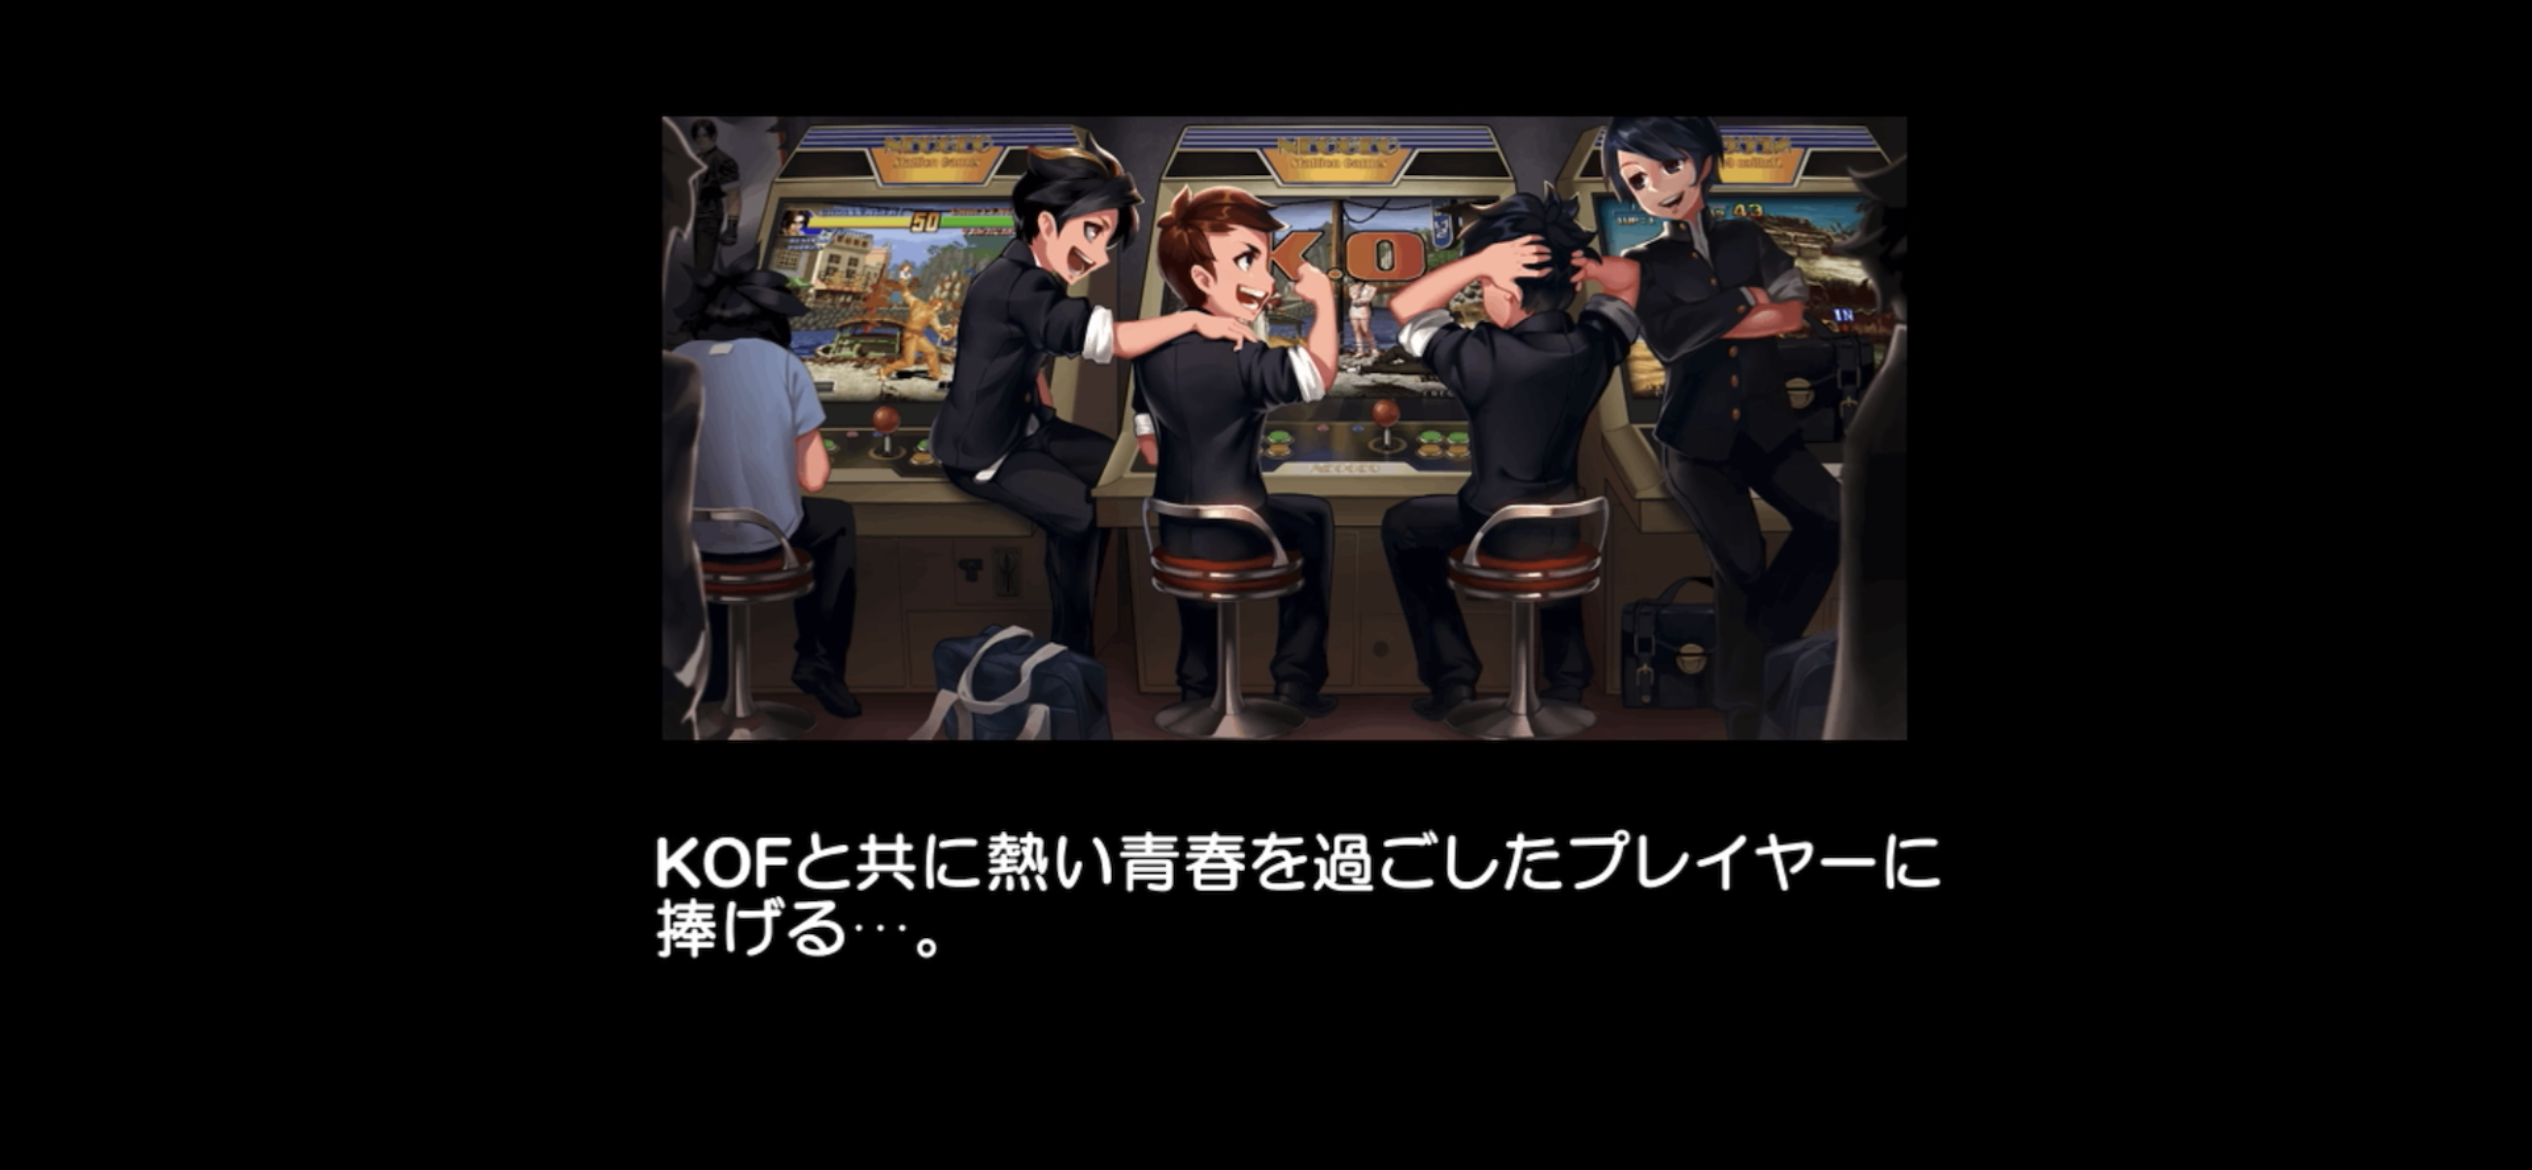 『THE KING OF FIGHTERS '98 UM OL』の魅力